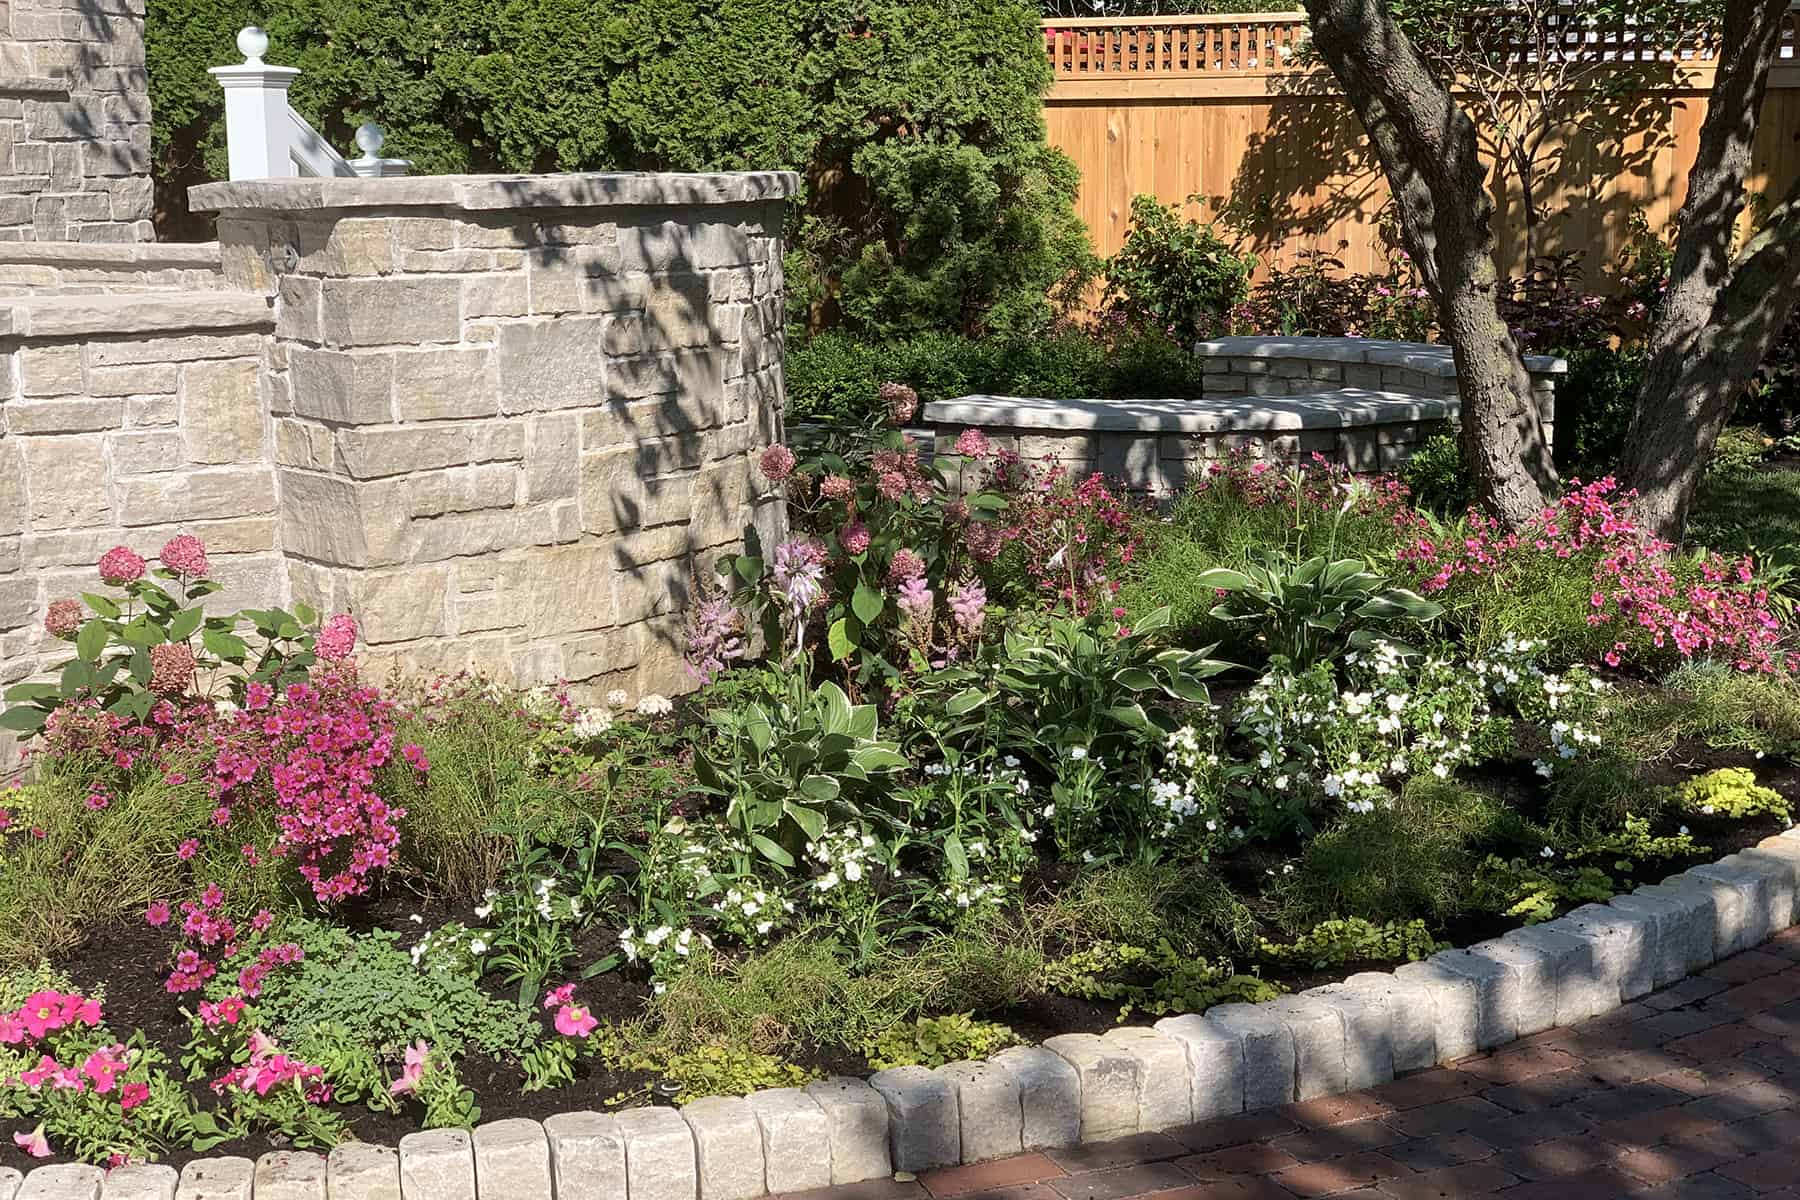 curved planting bed filled with colorful annuals and perennials with stone wall in the background